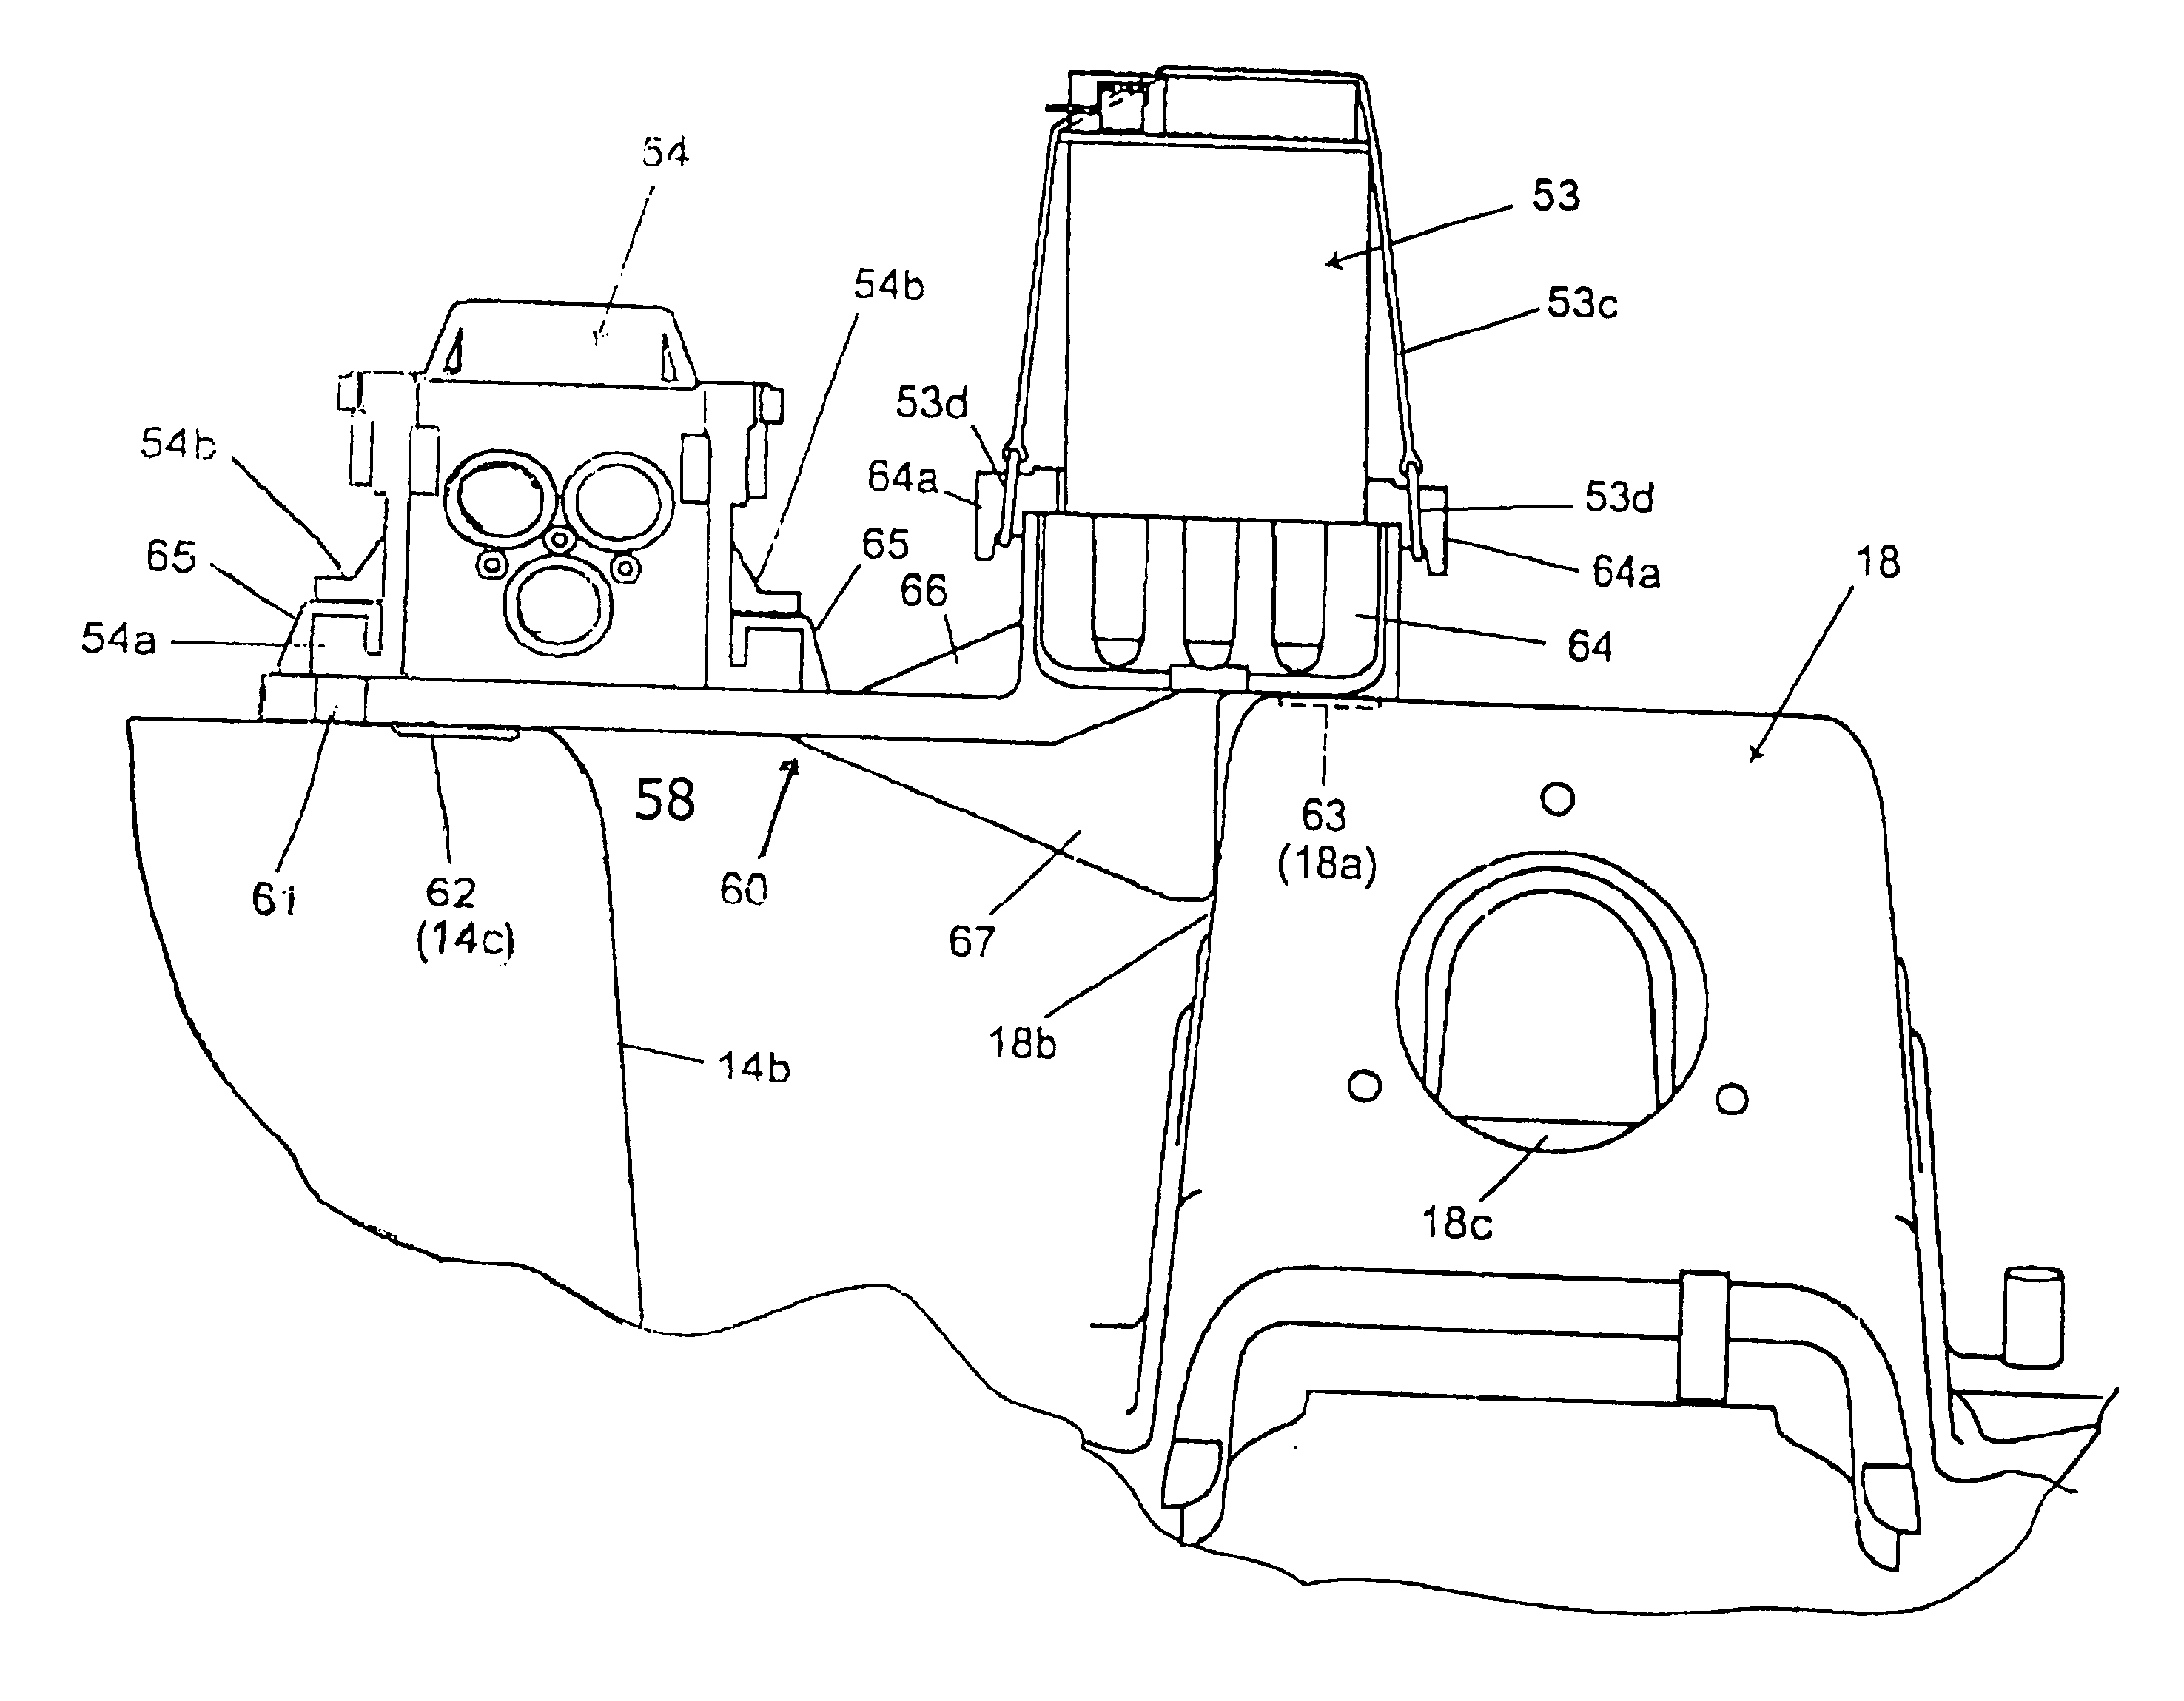 Battery mounting structure for a small watercraft, and method of using same